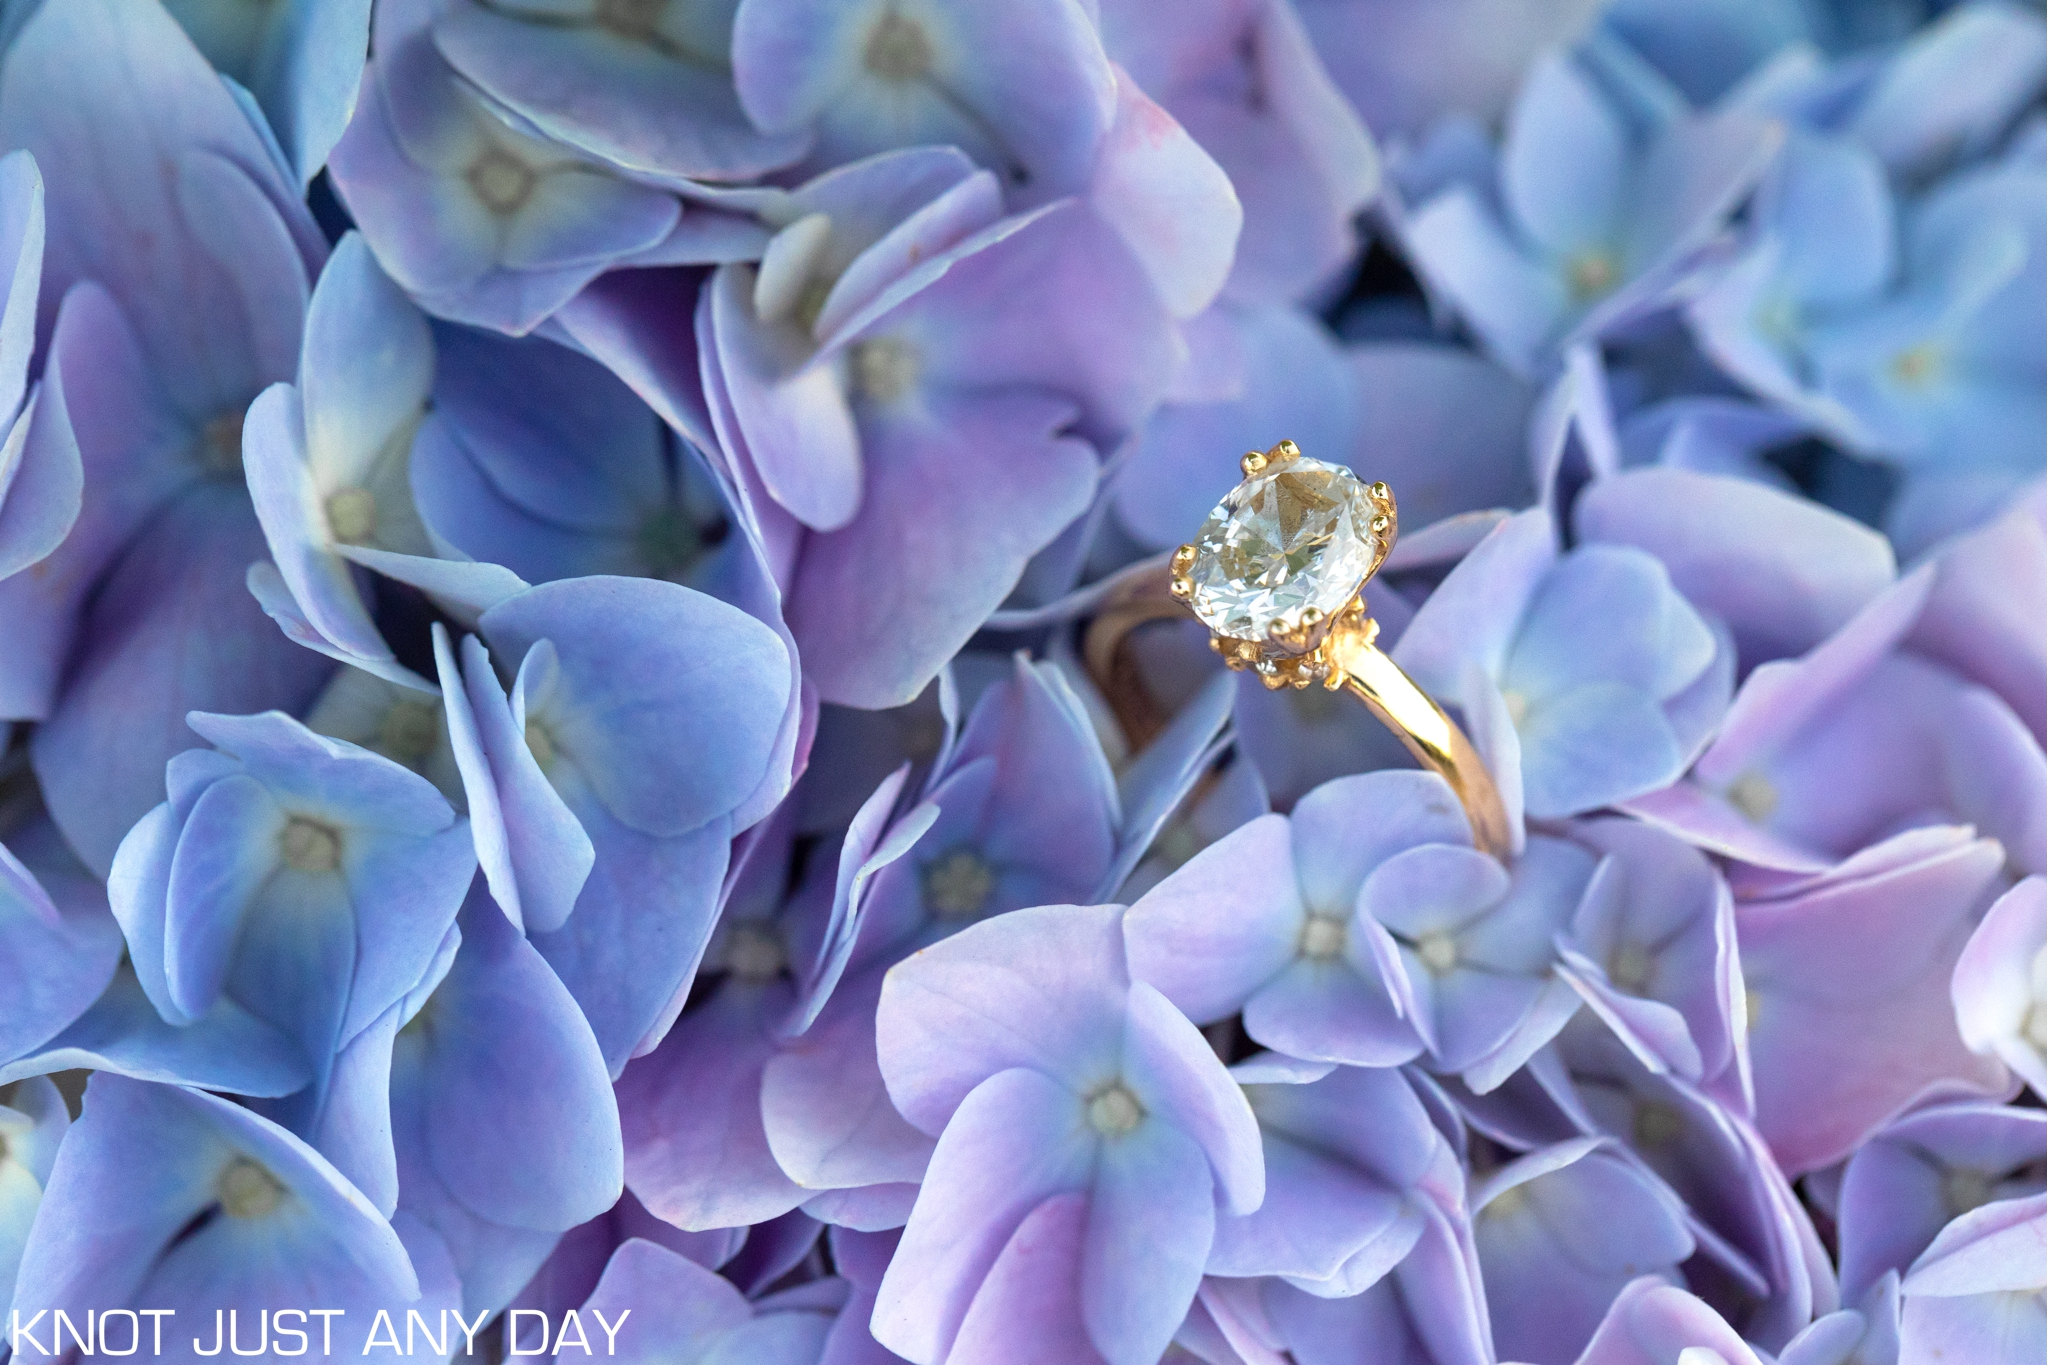 engagement ring perched in flowers